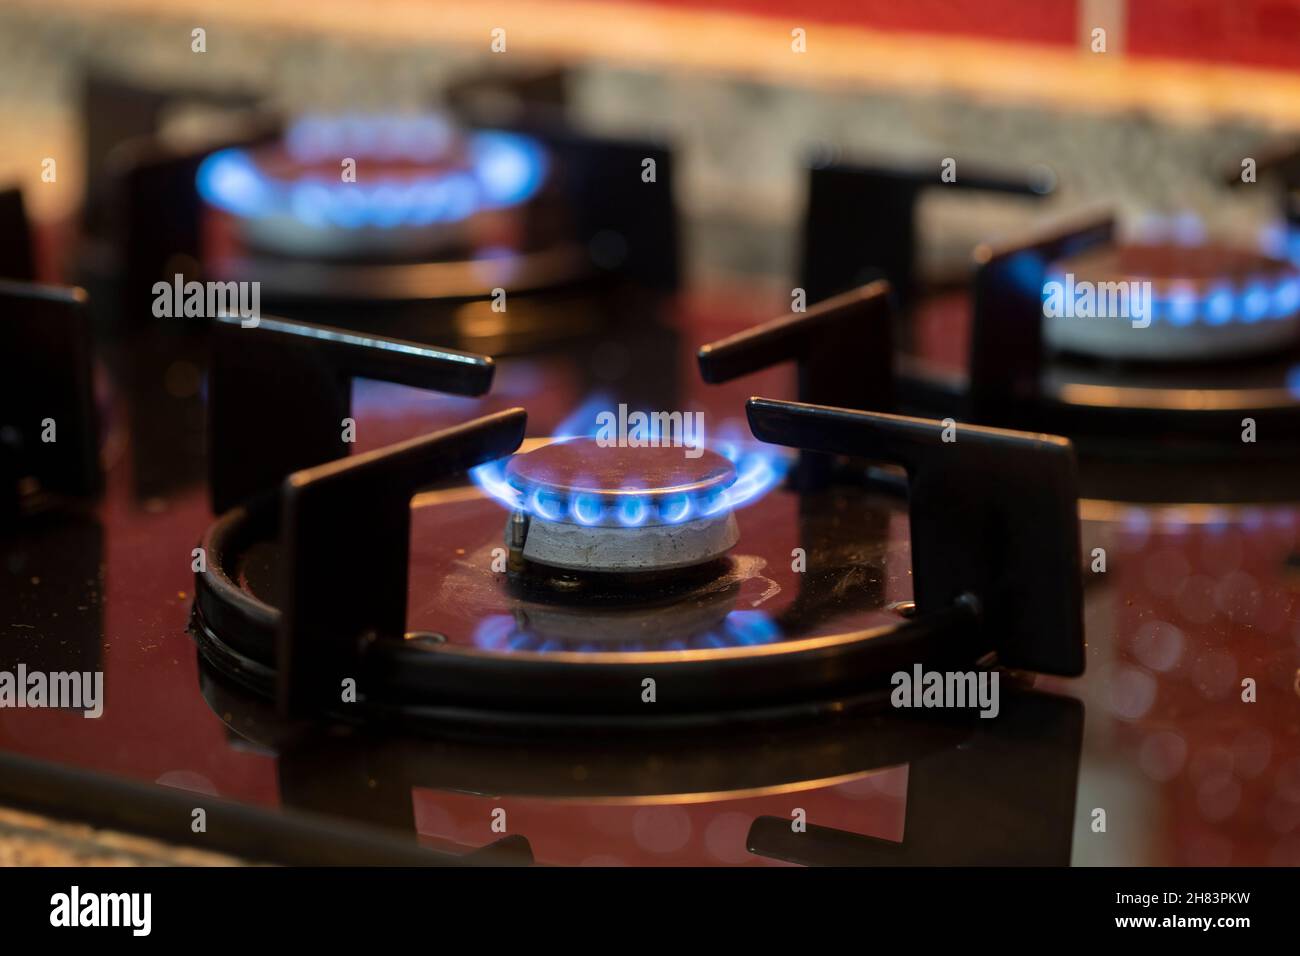 https://c8.alamy.com/comp/2H83PKW/the-gas-burns-in-the-burner-of-a-kitchen-stove-horizontal-view-2H83PKW.jpg